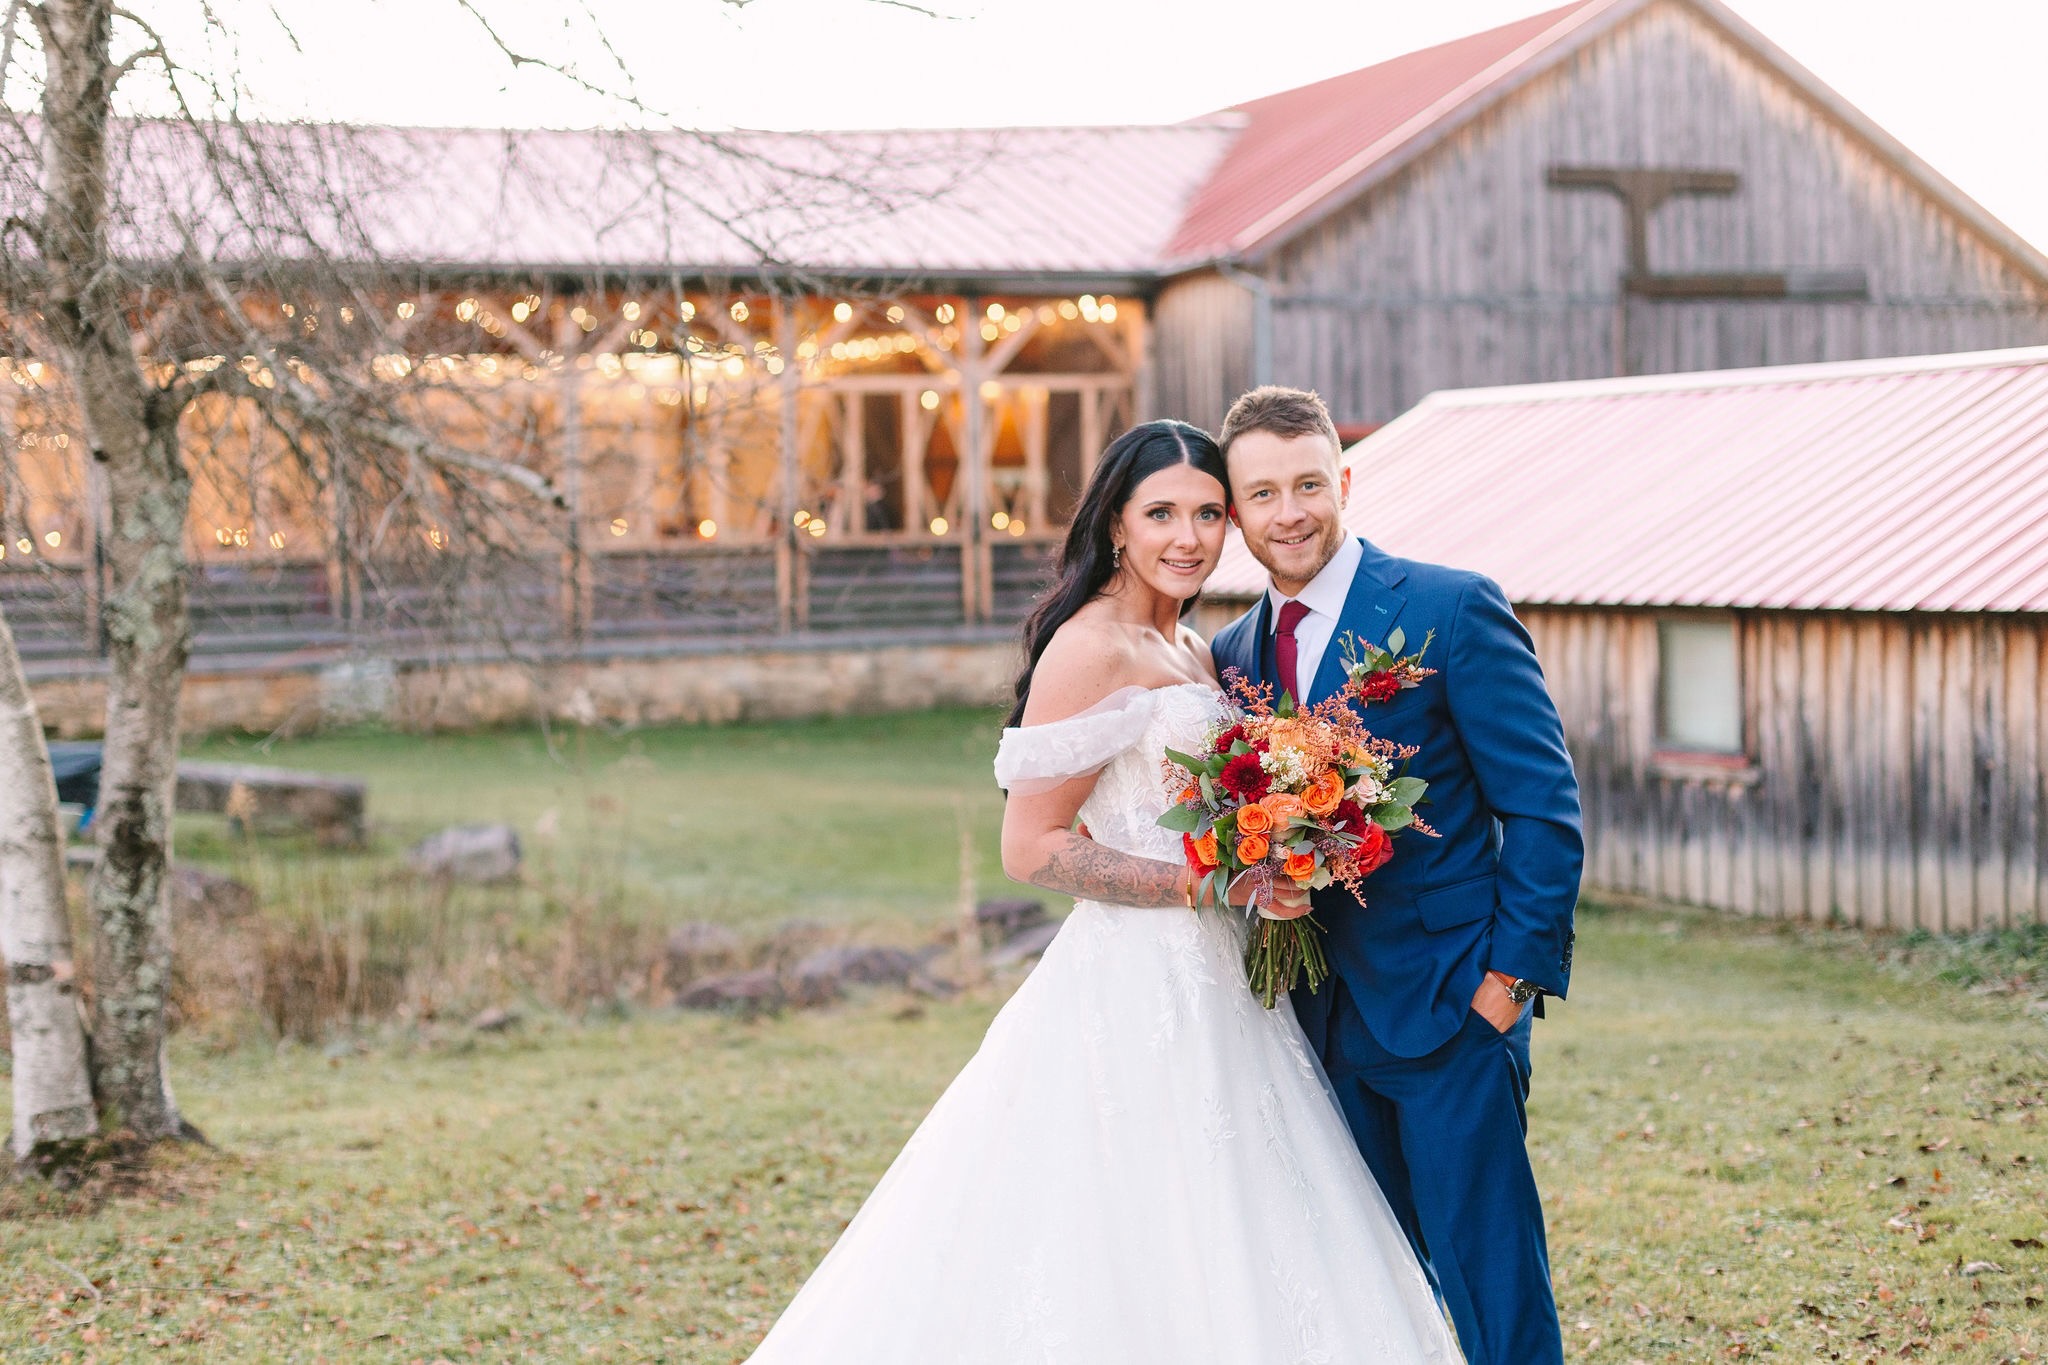 A photo of a bride and groom posing in front of the barn wedding venue at SanaView Farms Winery.